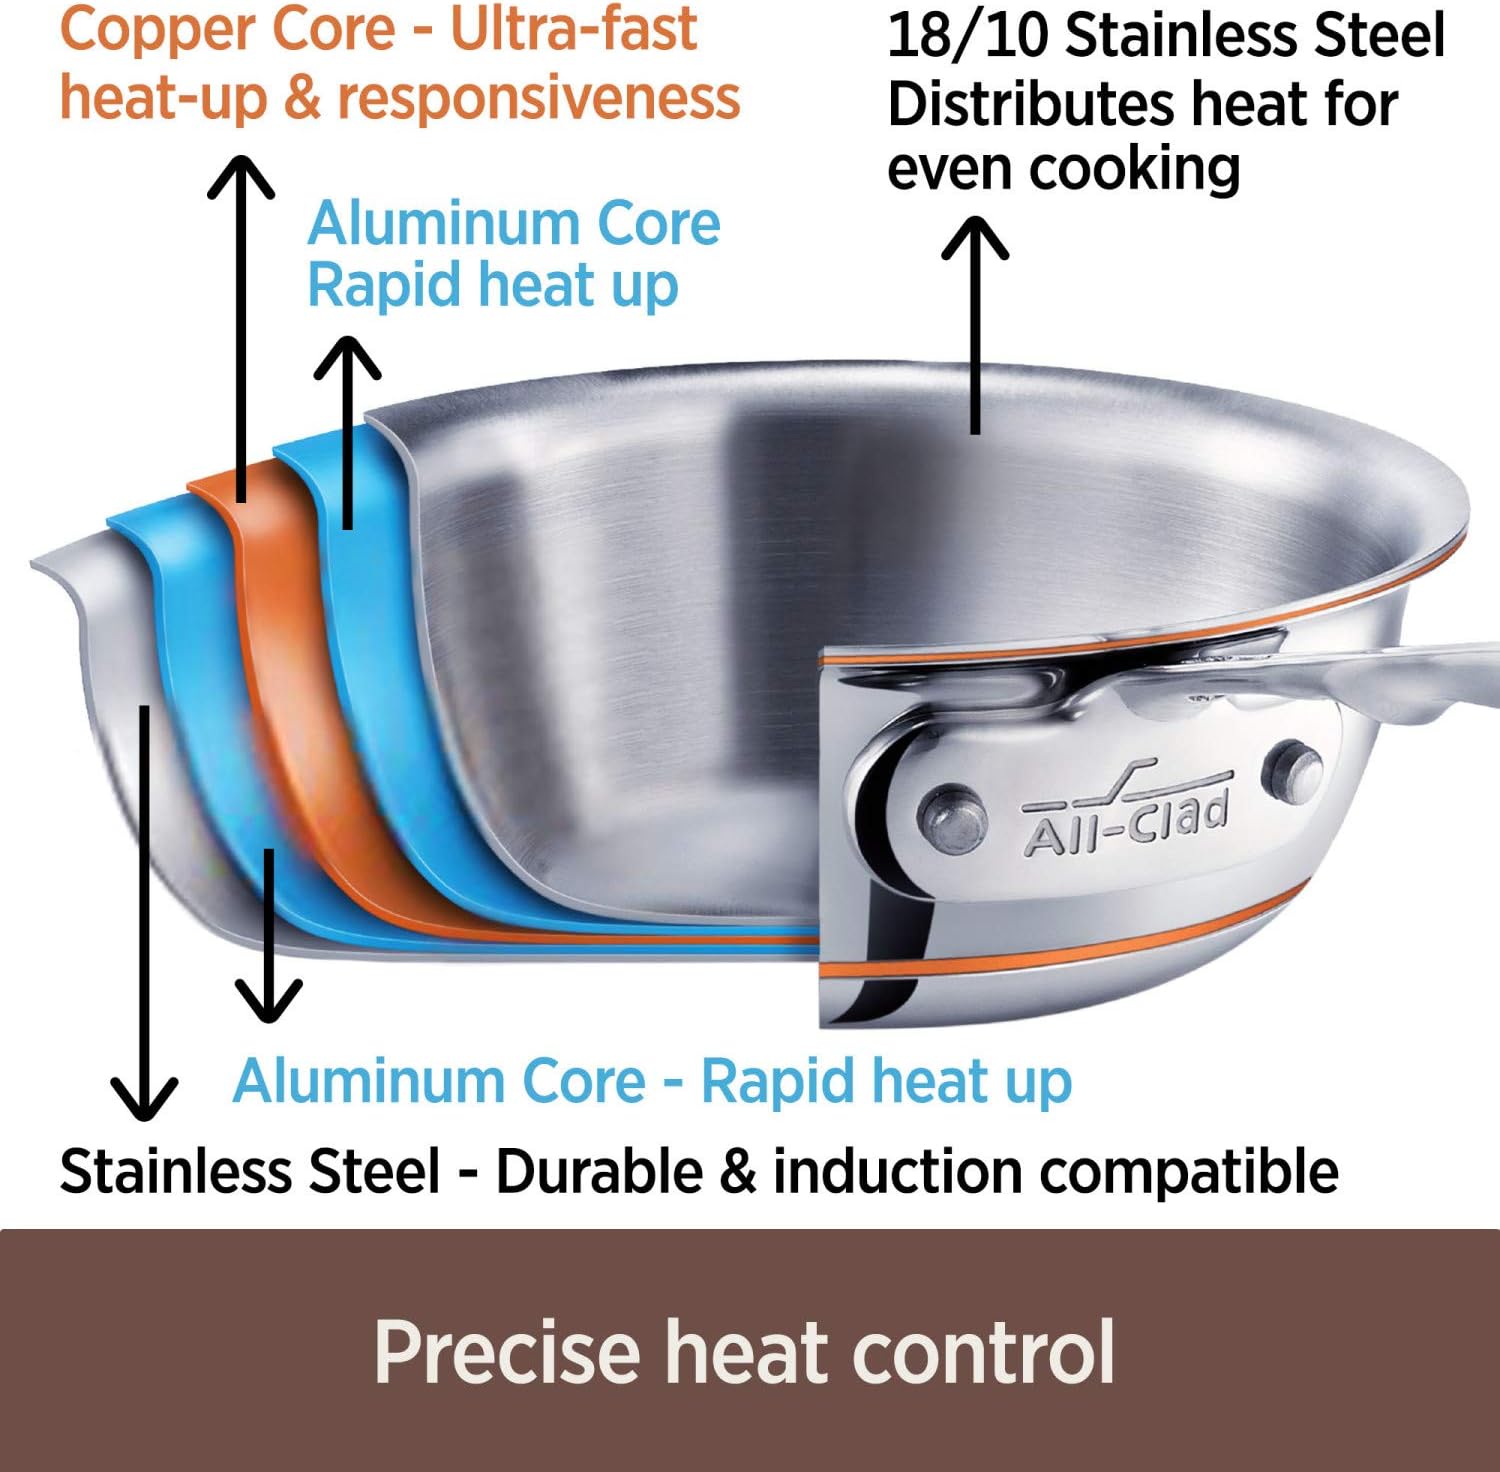 https://bigbigmart.com/wp-content/uploads/2023/09/All-Clad-Copper-Core-5-Ply-Stainless-Steel-Saute-Pan-with-Steel-Lid-5-Quart-Induction-Oven-Broil-Safe-600F-Pots-and-Pans-Cookware1.jpg